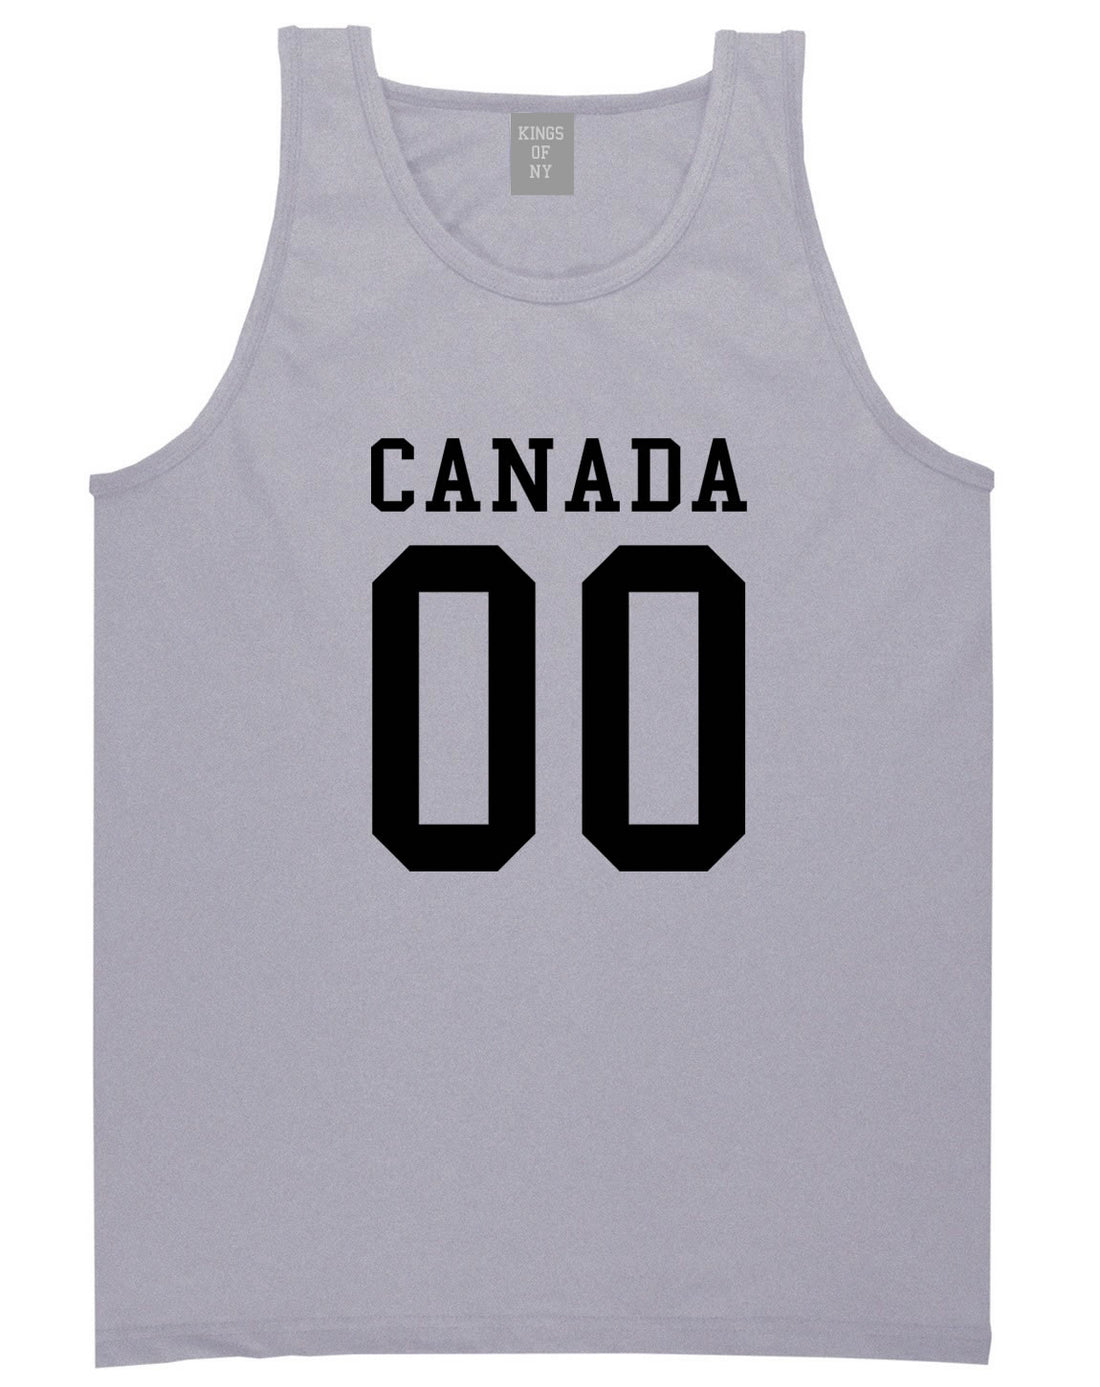 Canada Team 00 Jersey Tank Top in Grey By Kings Of NY